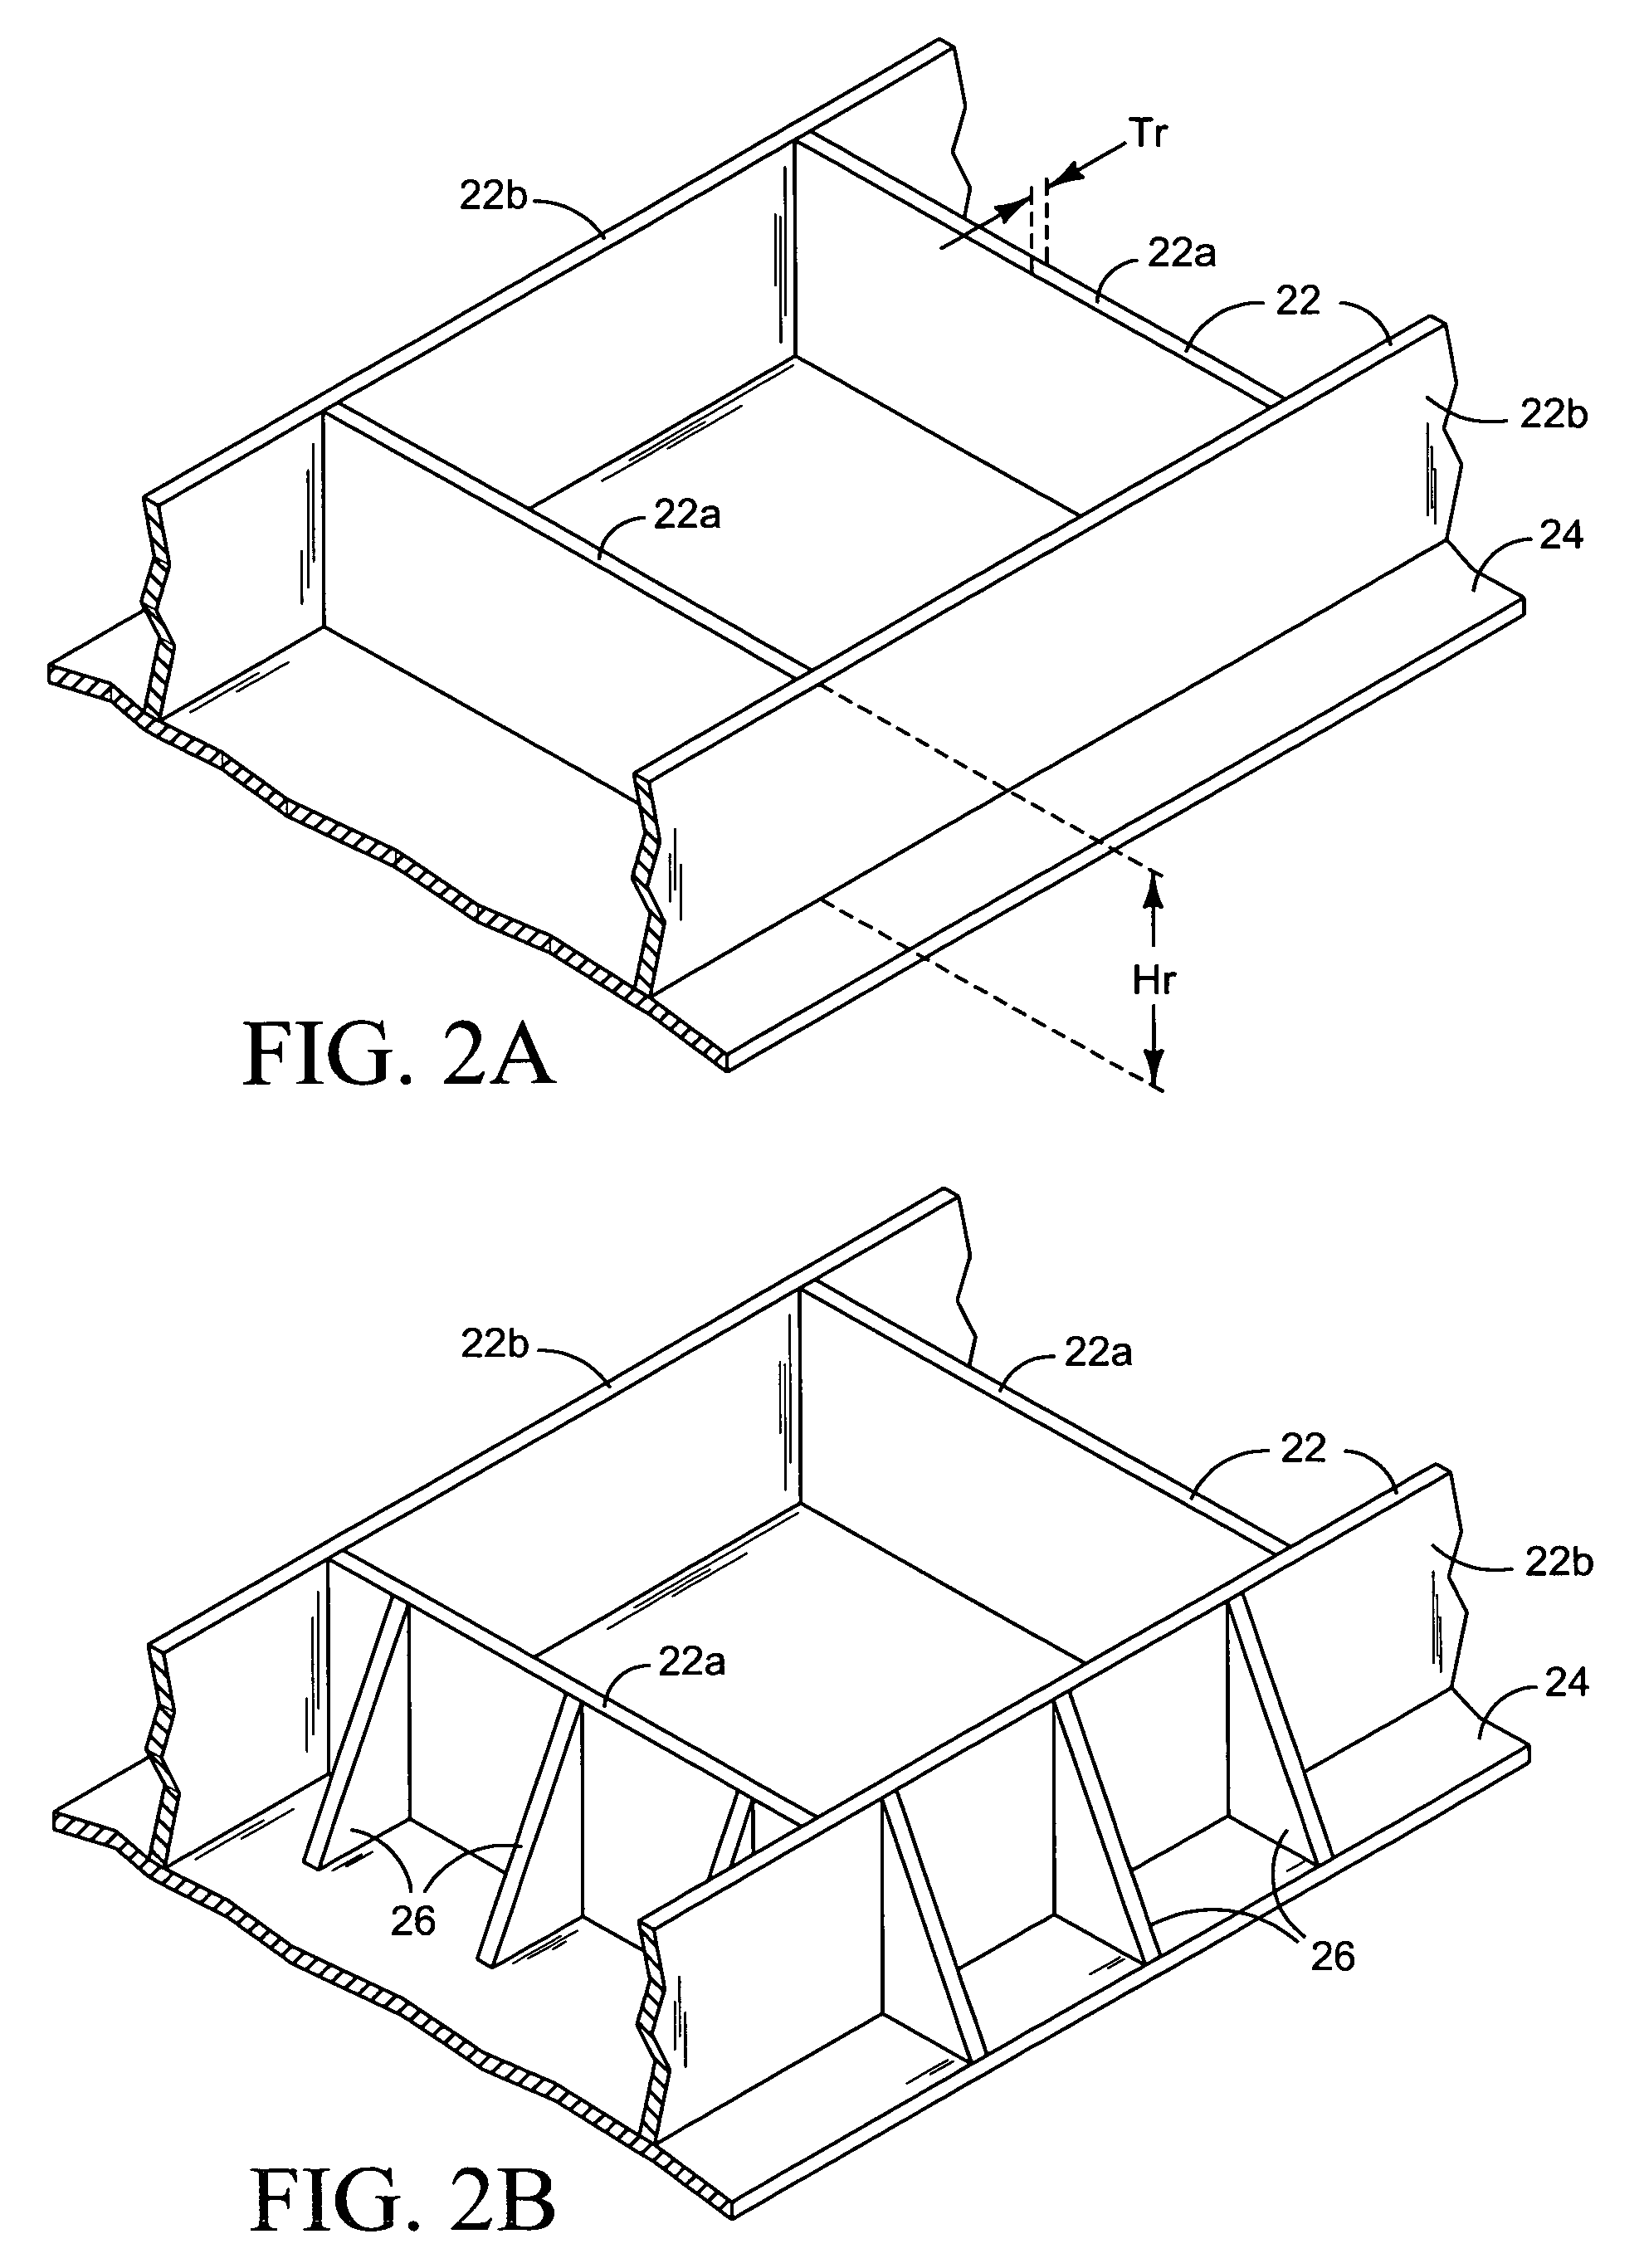 Method for machining using sacrificial supports